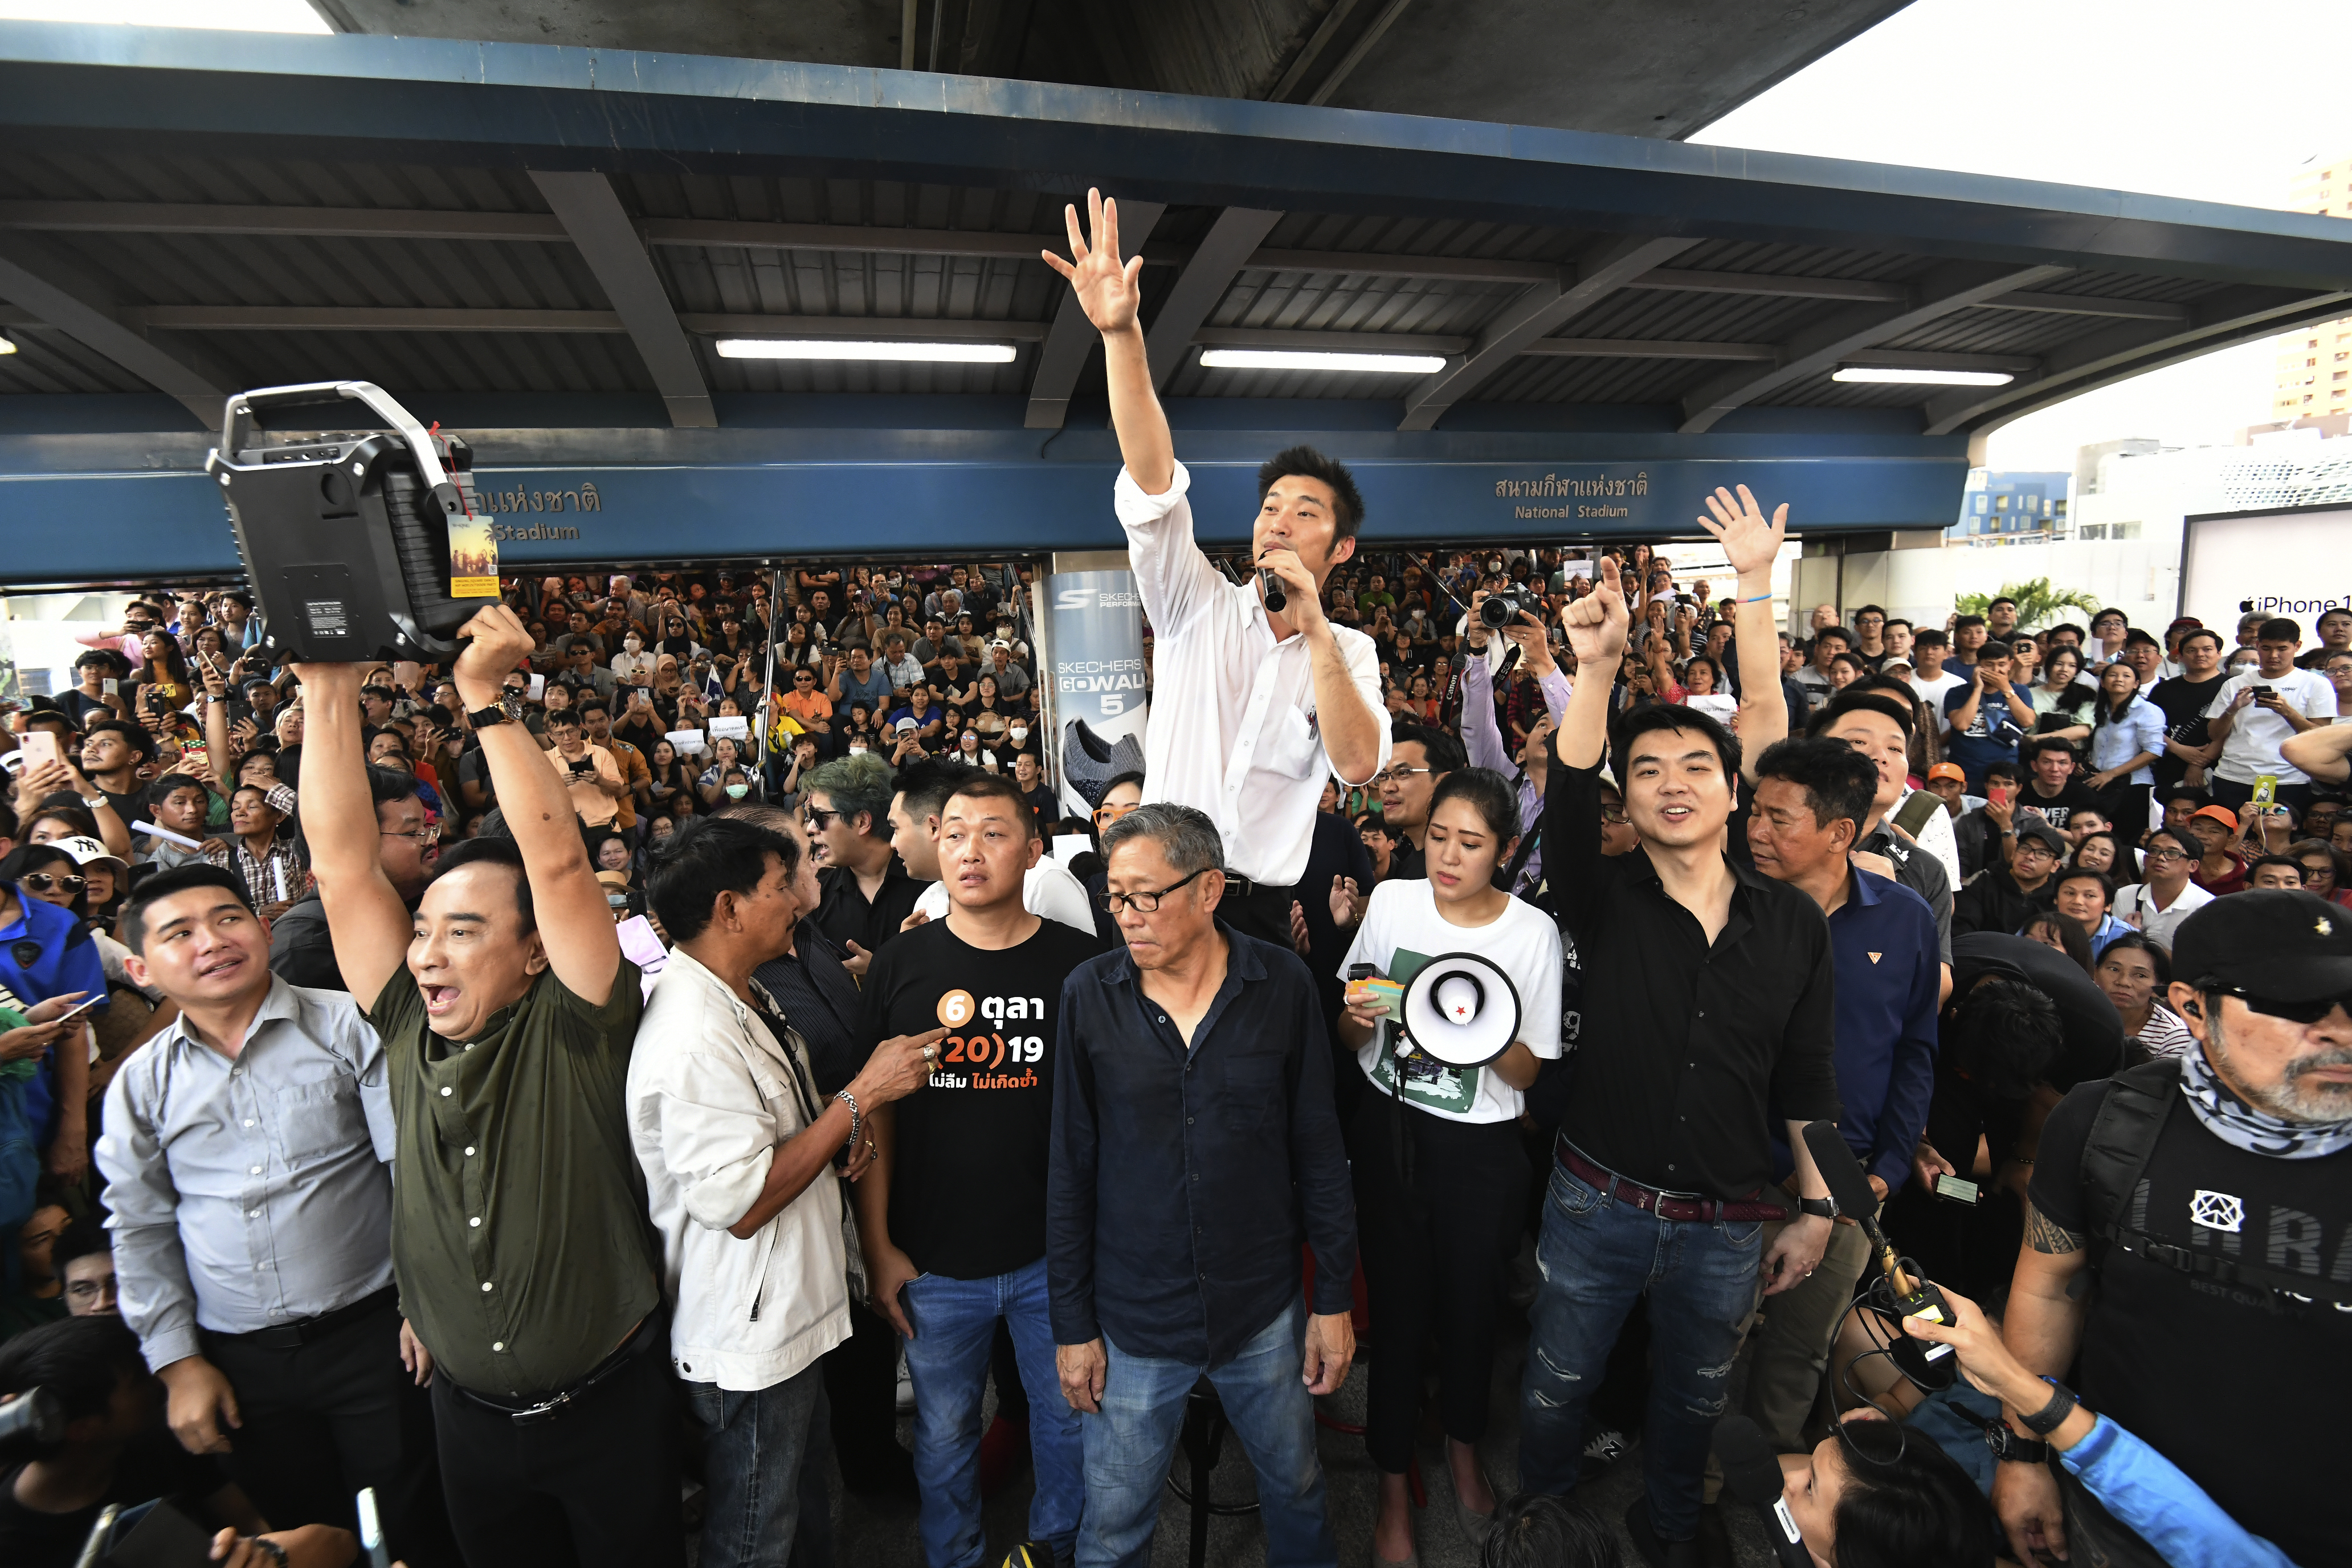 Thailand's Future Forward Party leader Thanathorn Juangroongruangkit talks to his supporters during rally in Bangkok, Thailand on Dec. 14, 2019. (AP)